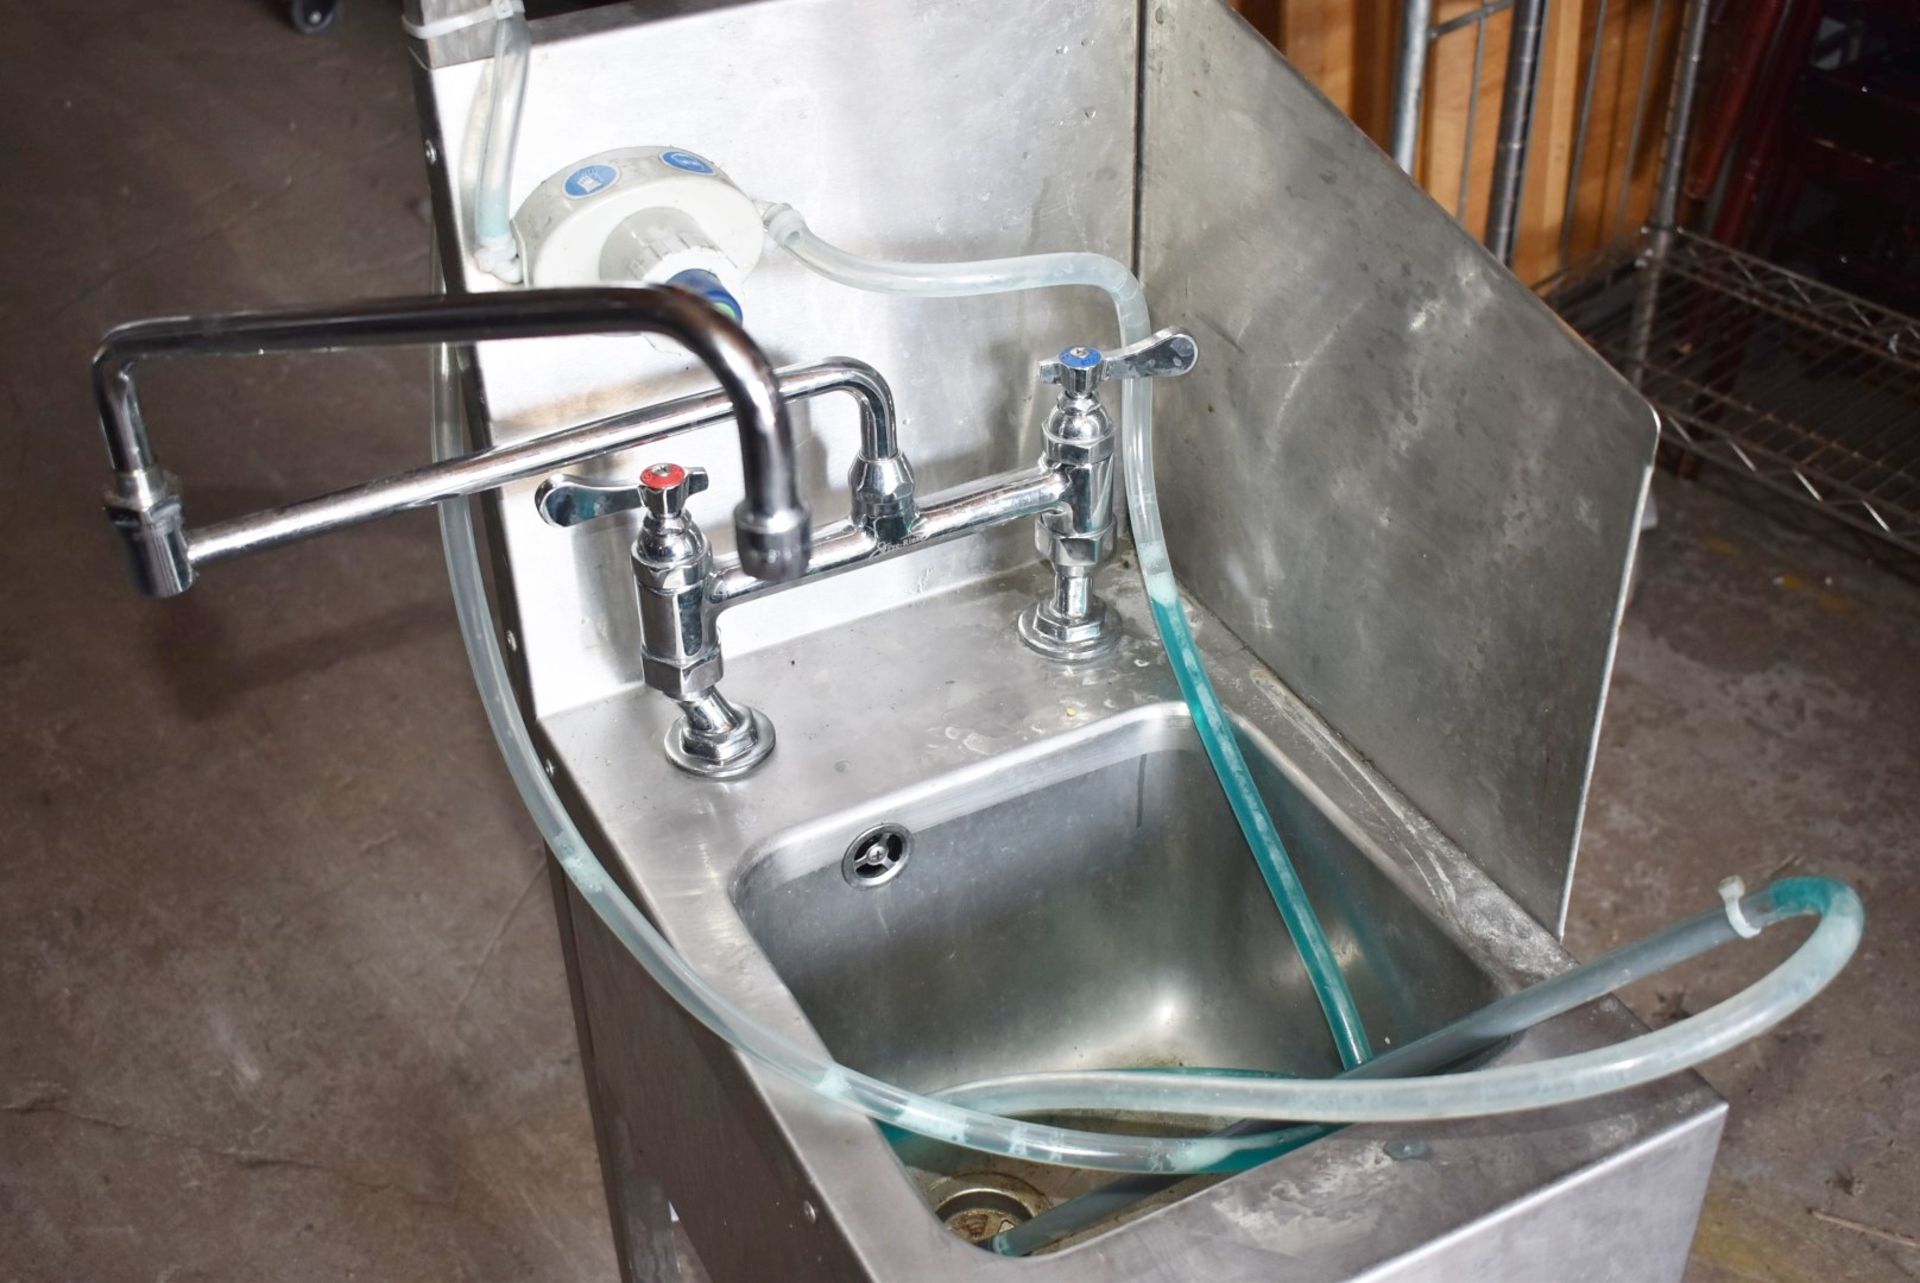 1 x Slim Janitorial Cleaning Wash Station - Features Wash Bowl, Integral Mop Hanger, Top Shelf With - Image 7 of 7